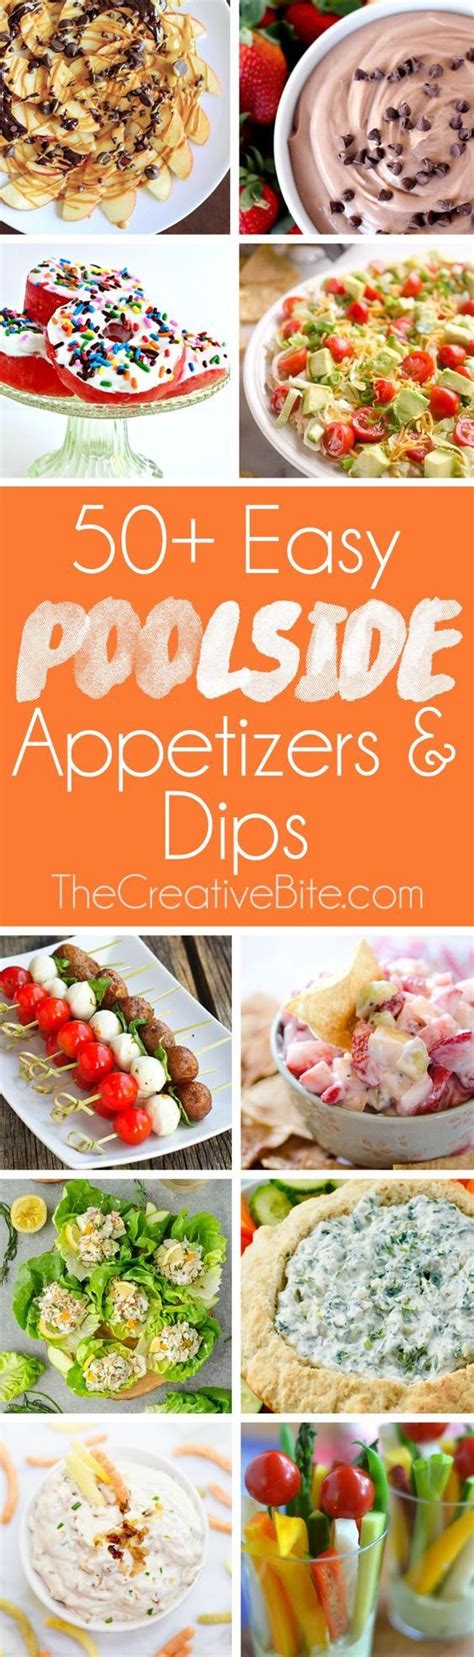 50 Easy Poolside Appetizers And Dips Are A Collection Of Delicious